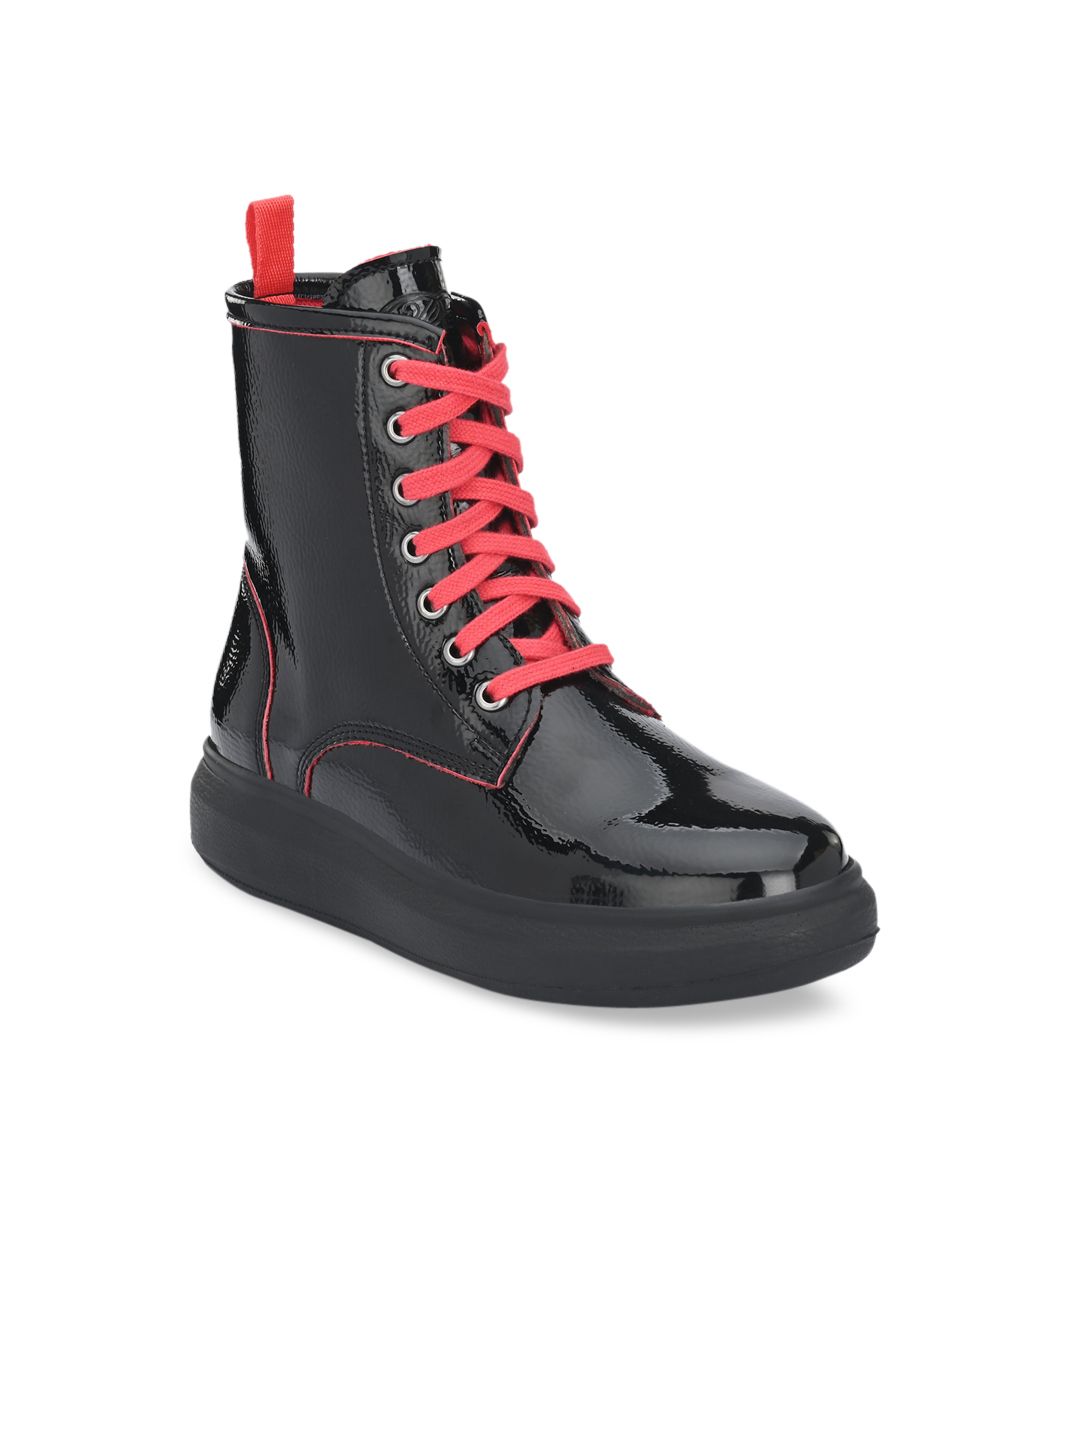 Delize Women Black High-Top Flat Boots Price in India